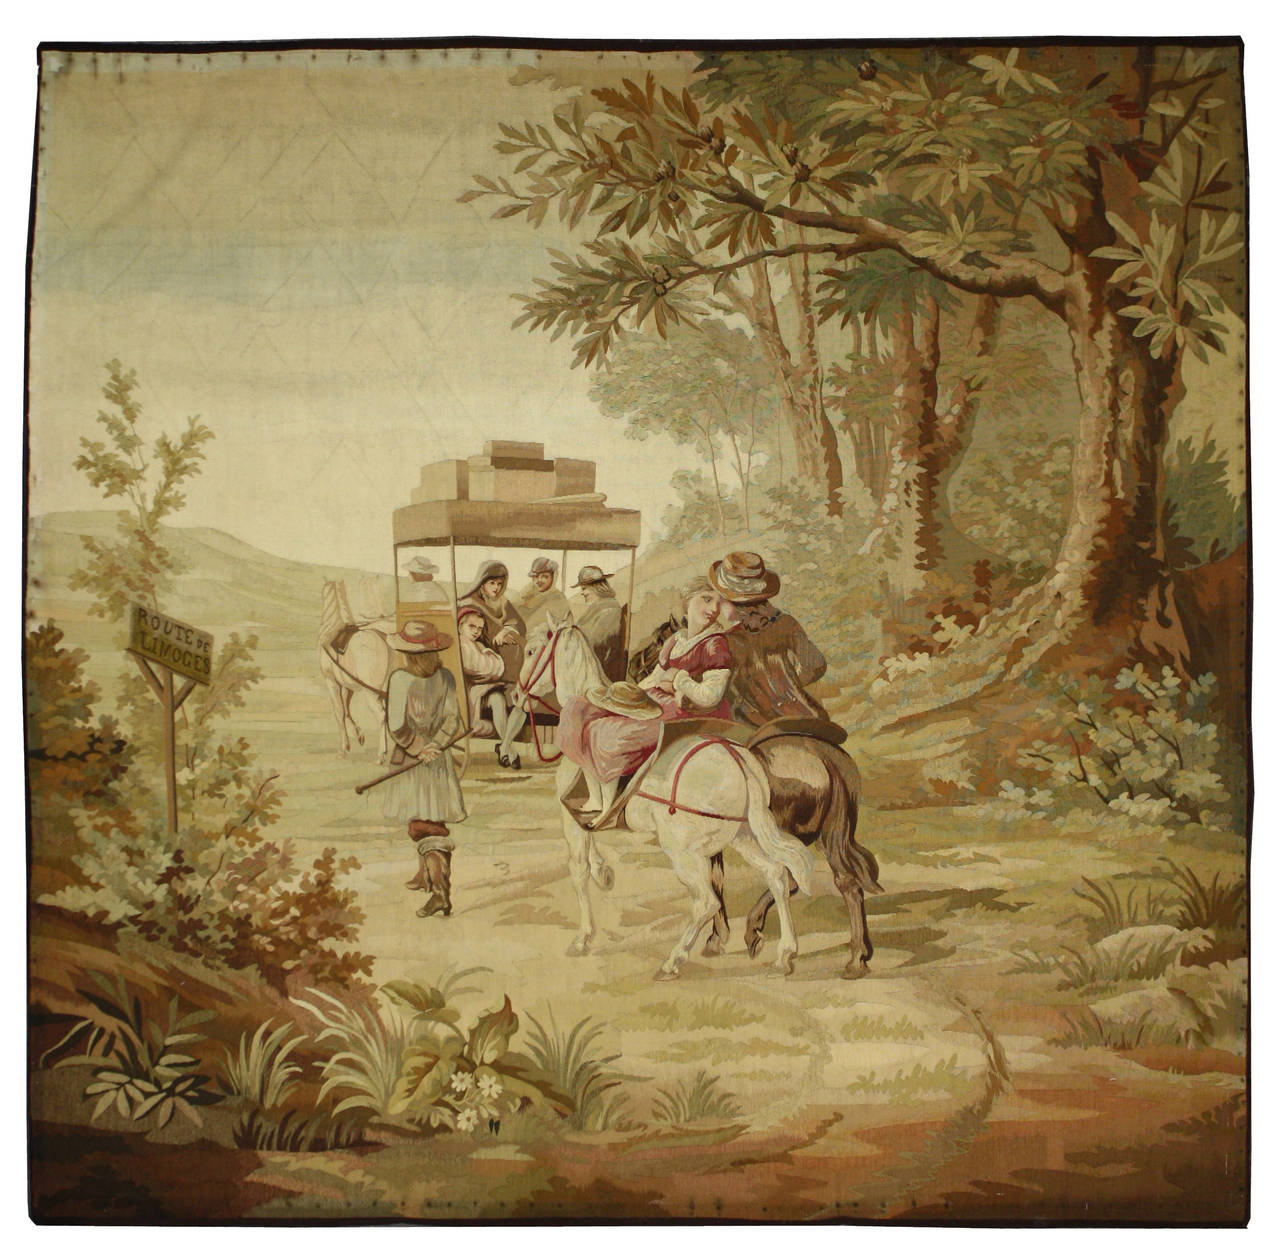 72470 Late 19th Century Antique French Pastoral Tapestry Route de Limoges with Louis XV Style, French Rococo Wall Hanging. The scene depicts a family moving by a horse drawn cart on their way via route de Liomges. Young lovers trailing behind. The